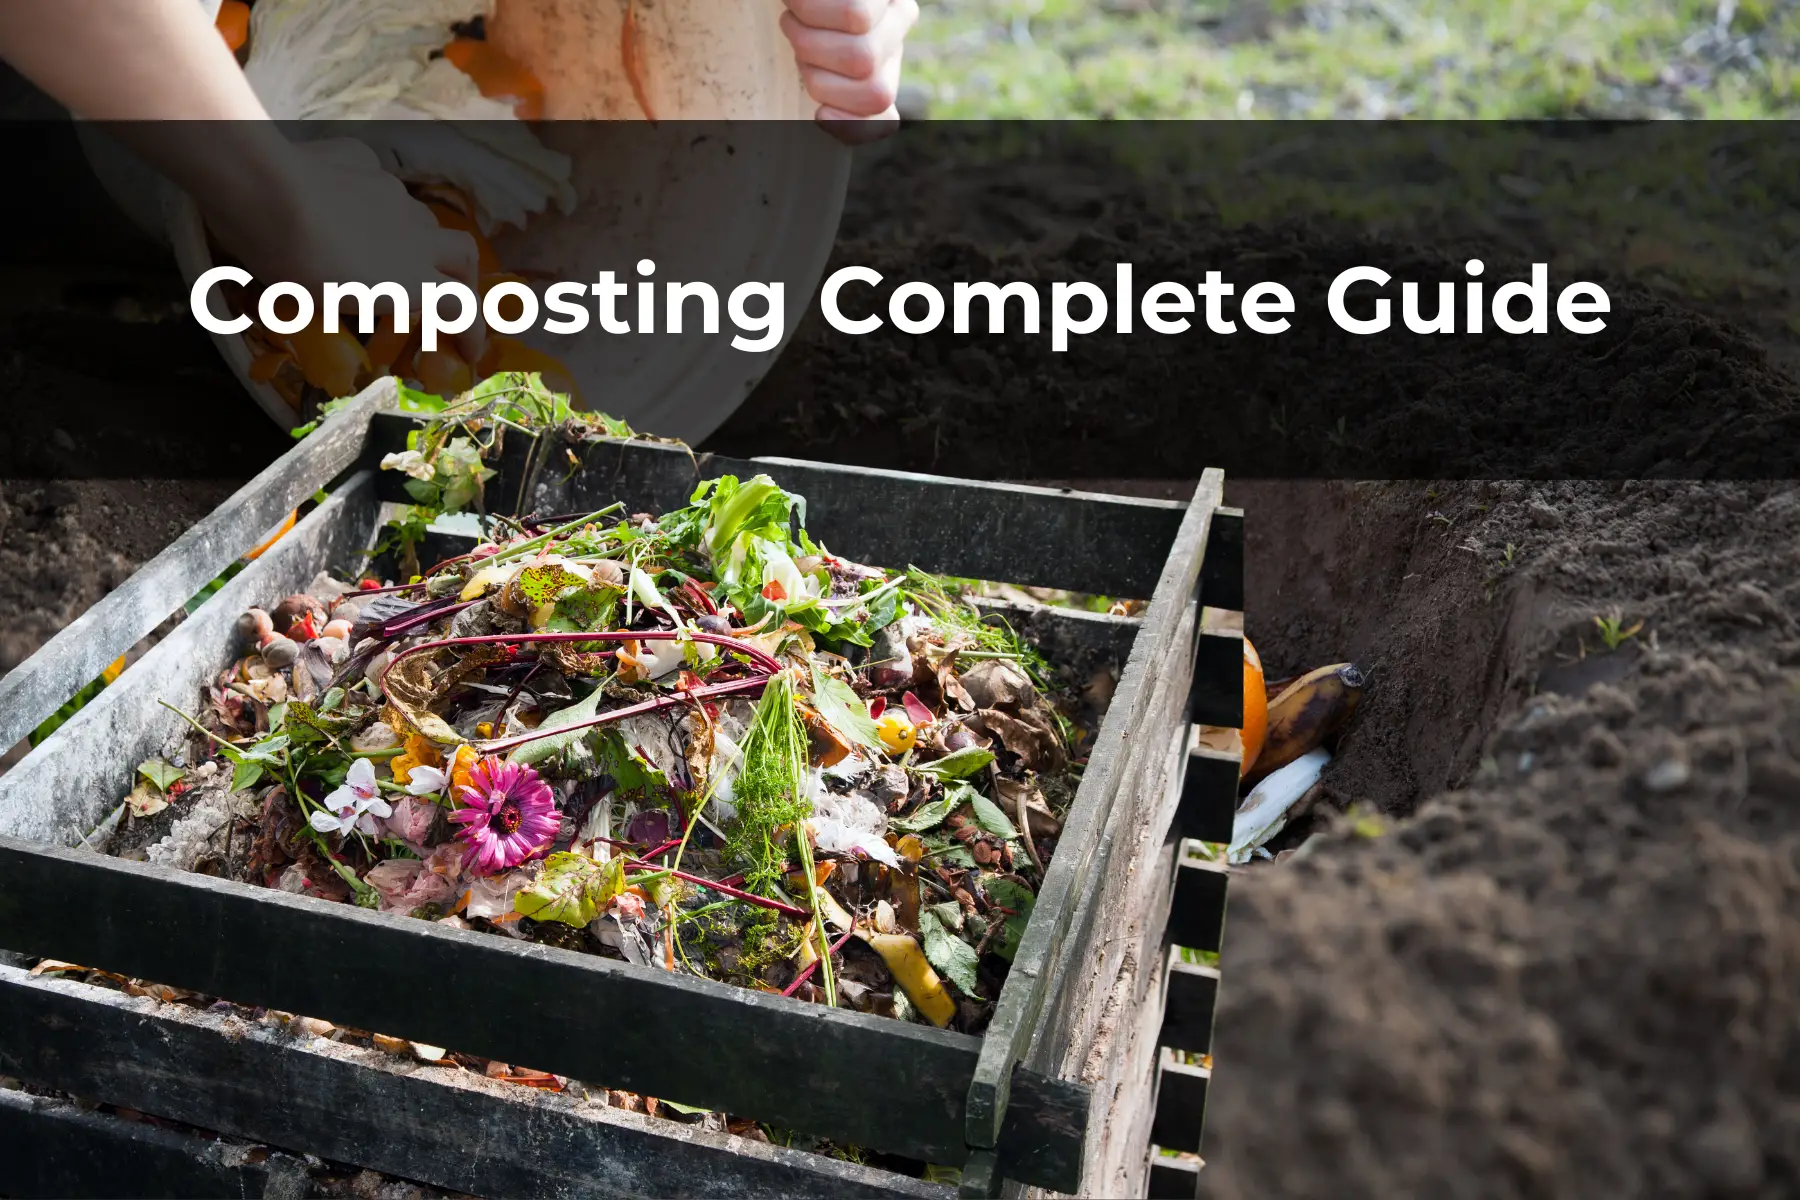 Composting Complete Guide